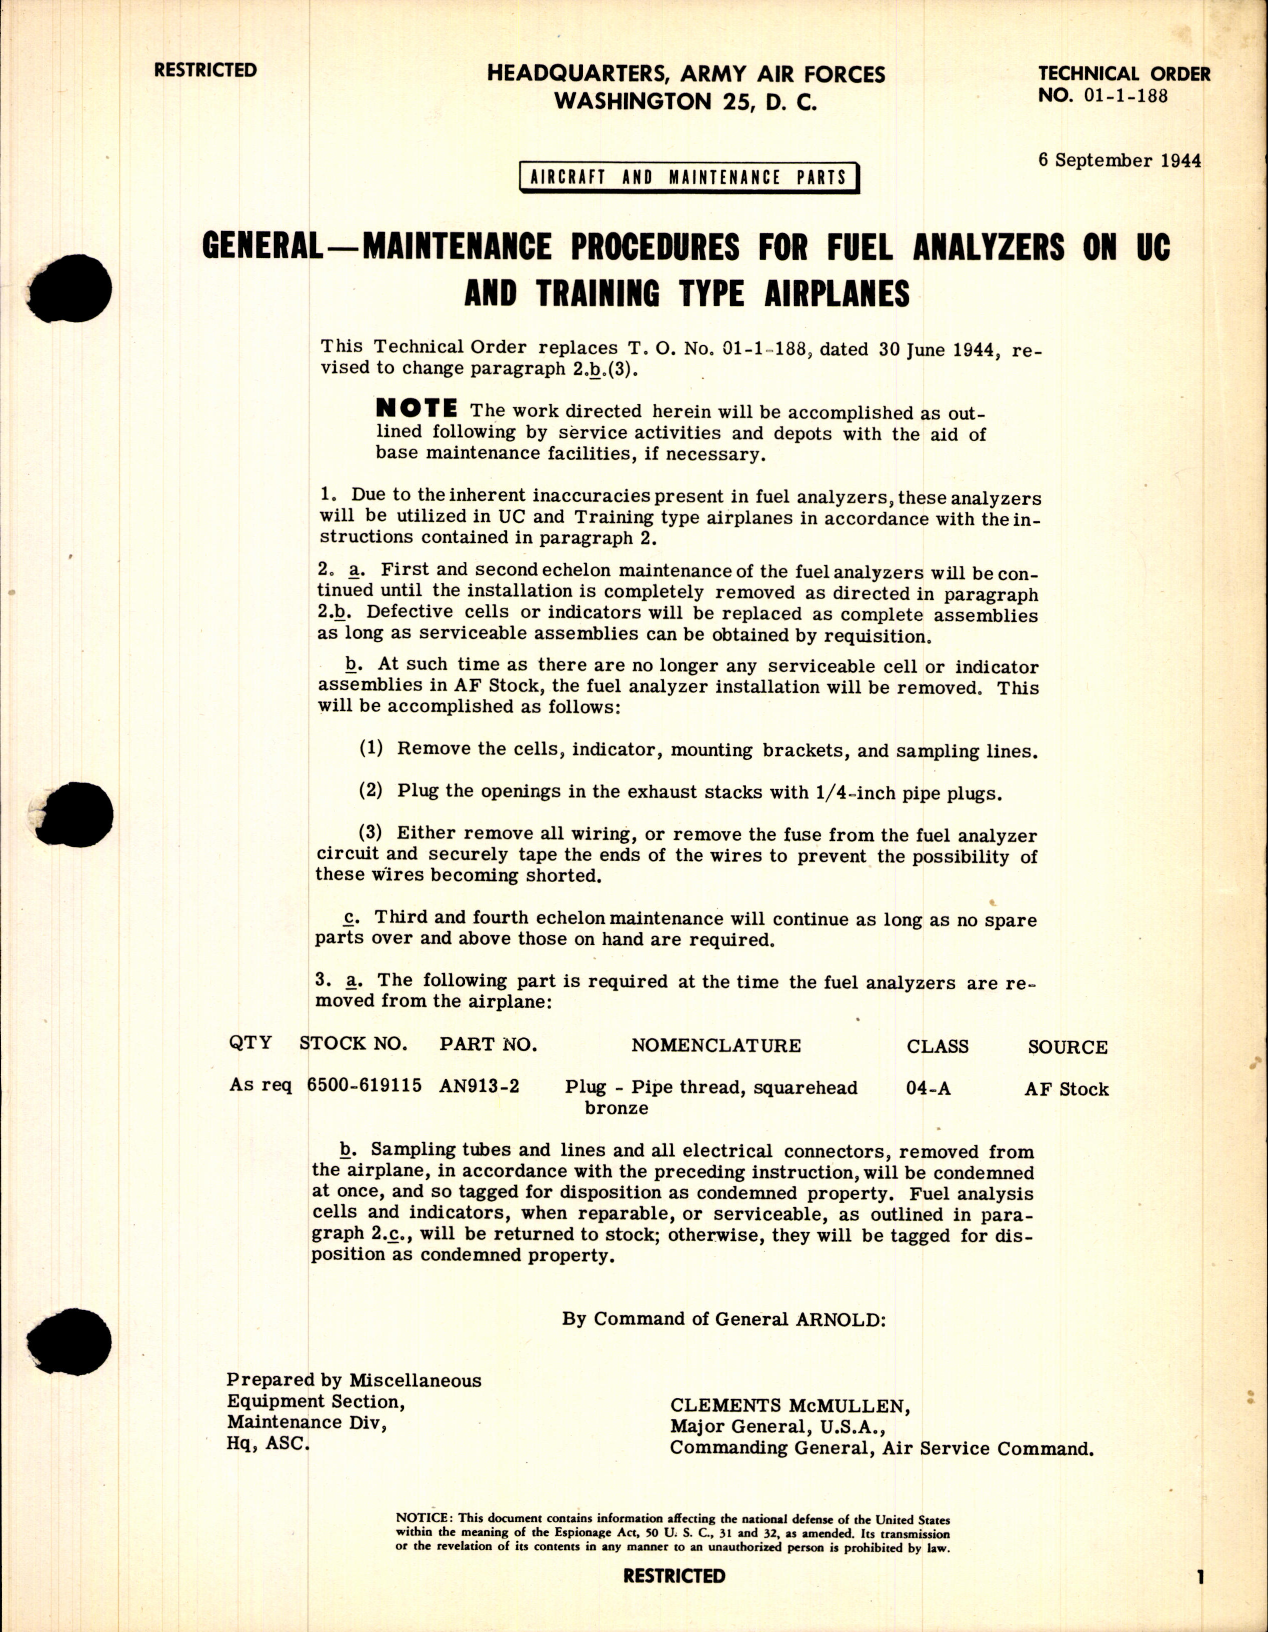 Sample page 1 from AirCorps Library document: Aircraft and Maintenance Parts; Maintenance Procedures for Fuel Analyzers on UC and Training Type Airplanes